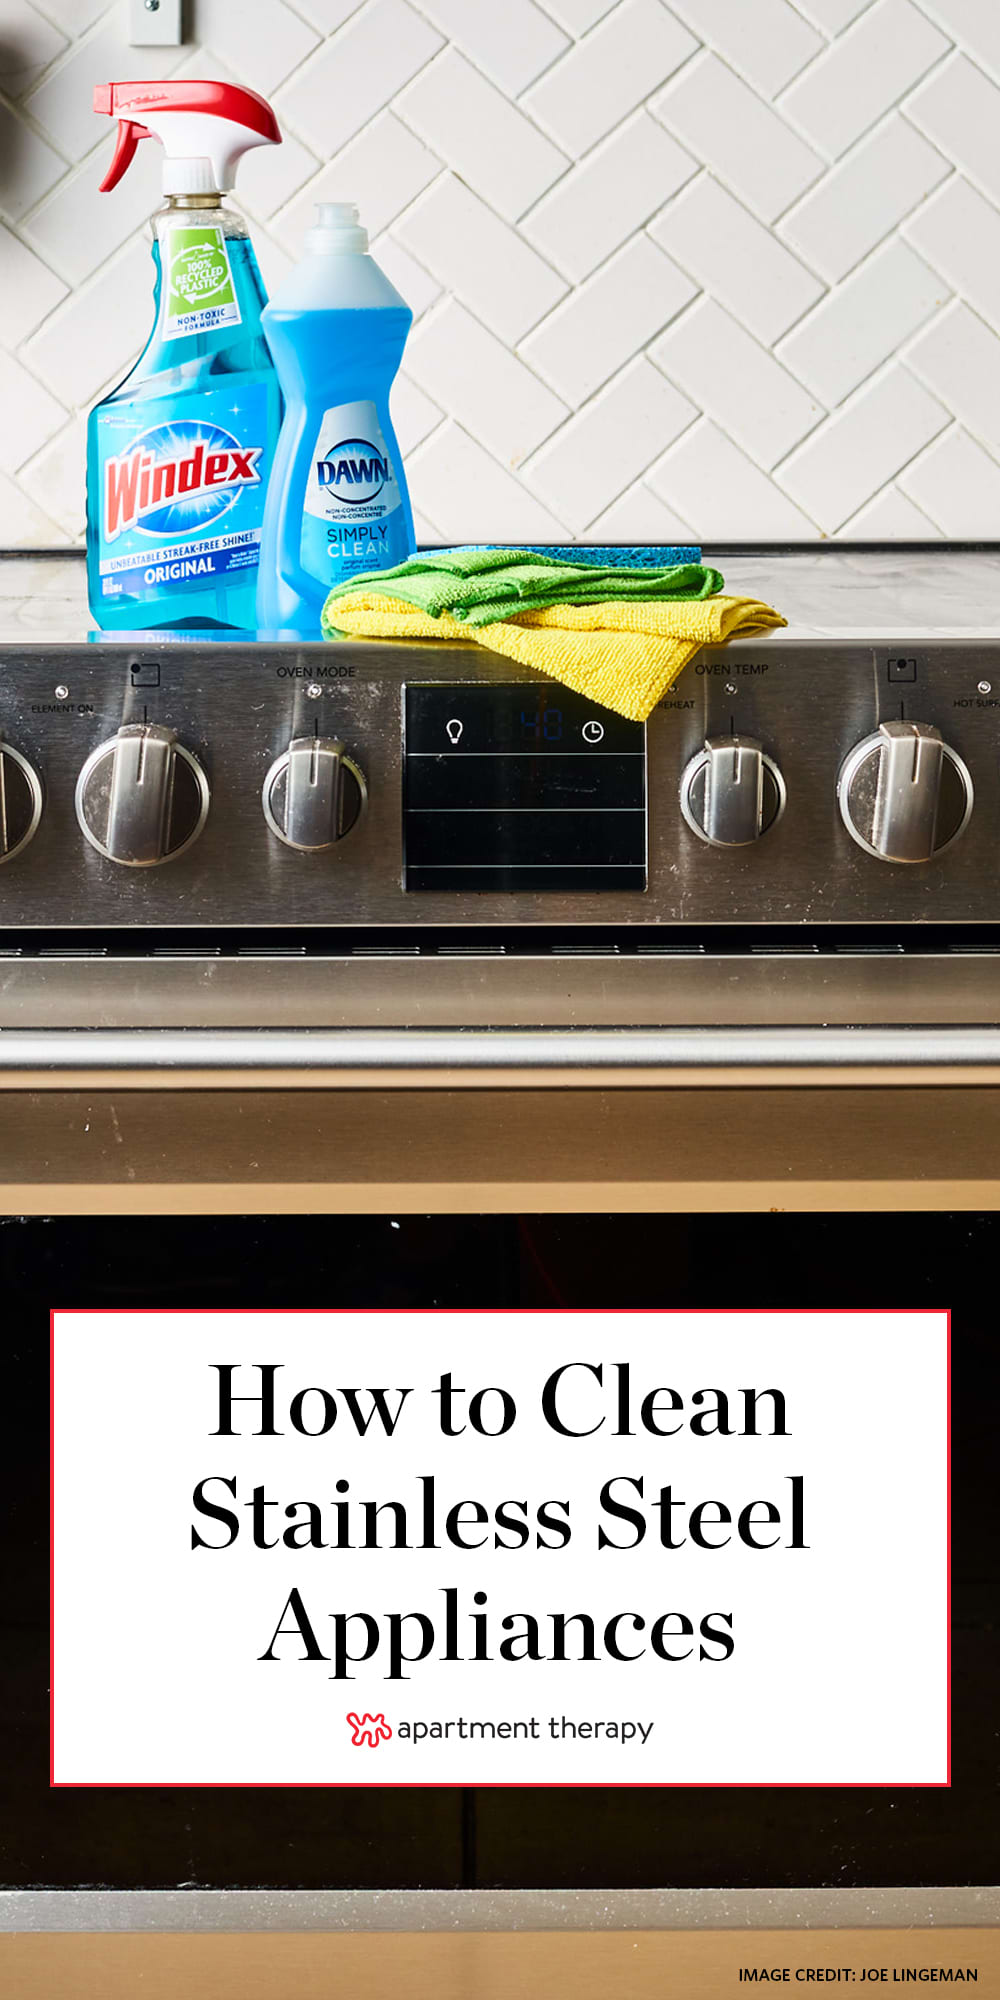 Cleaning Supply Savings: Twinkle Stainless Steel Cleaner and Polish